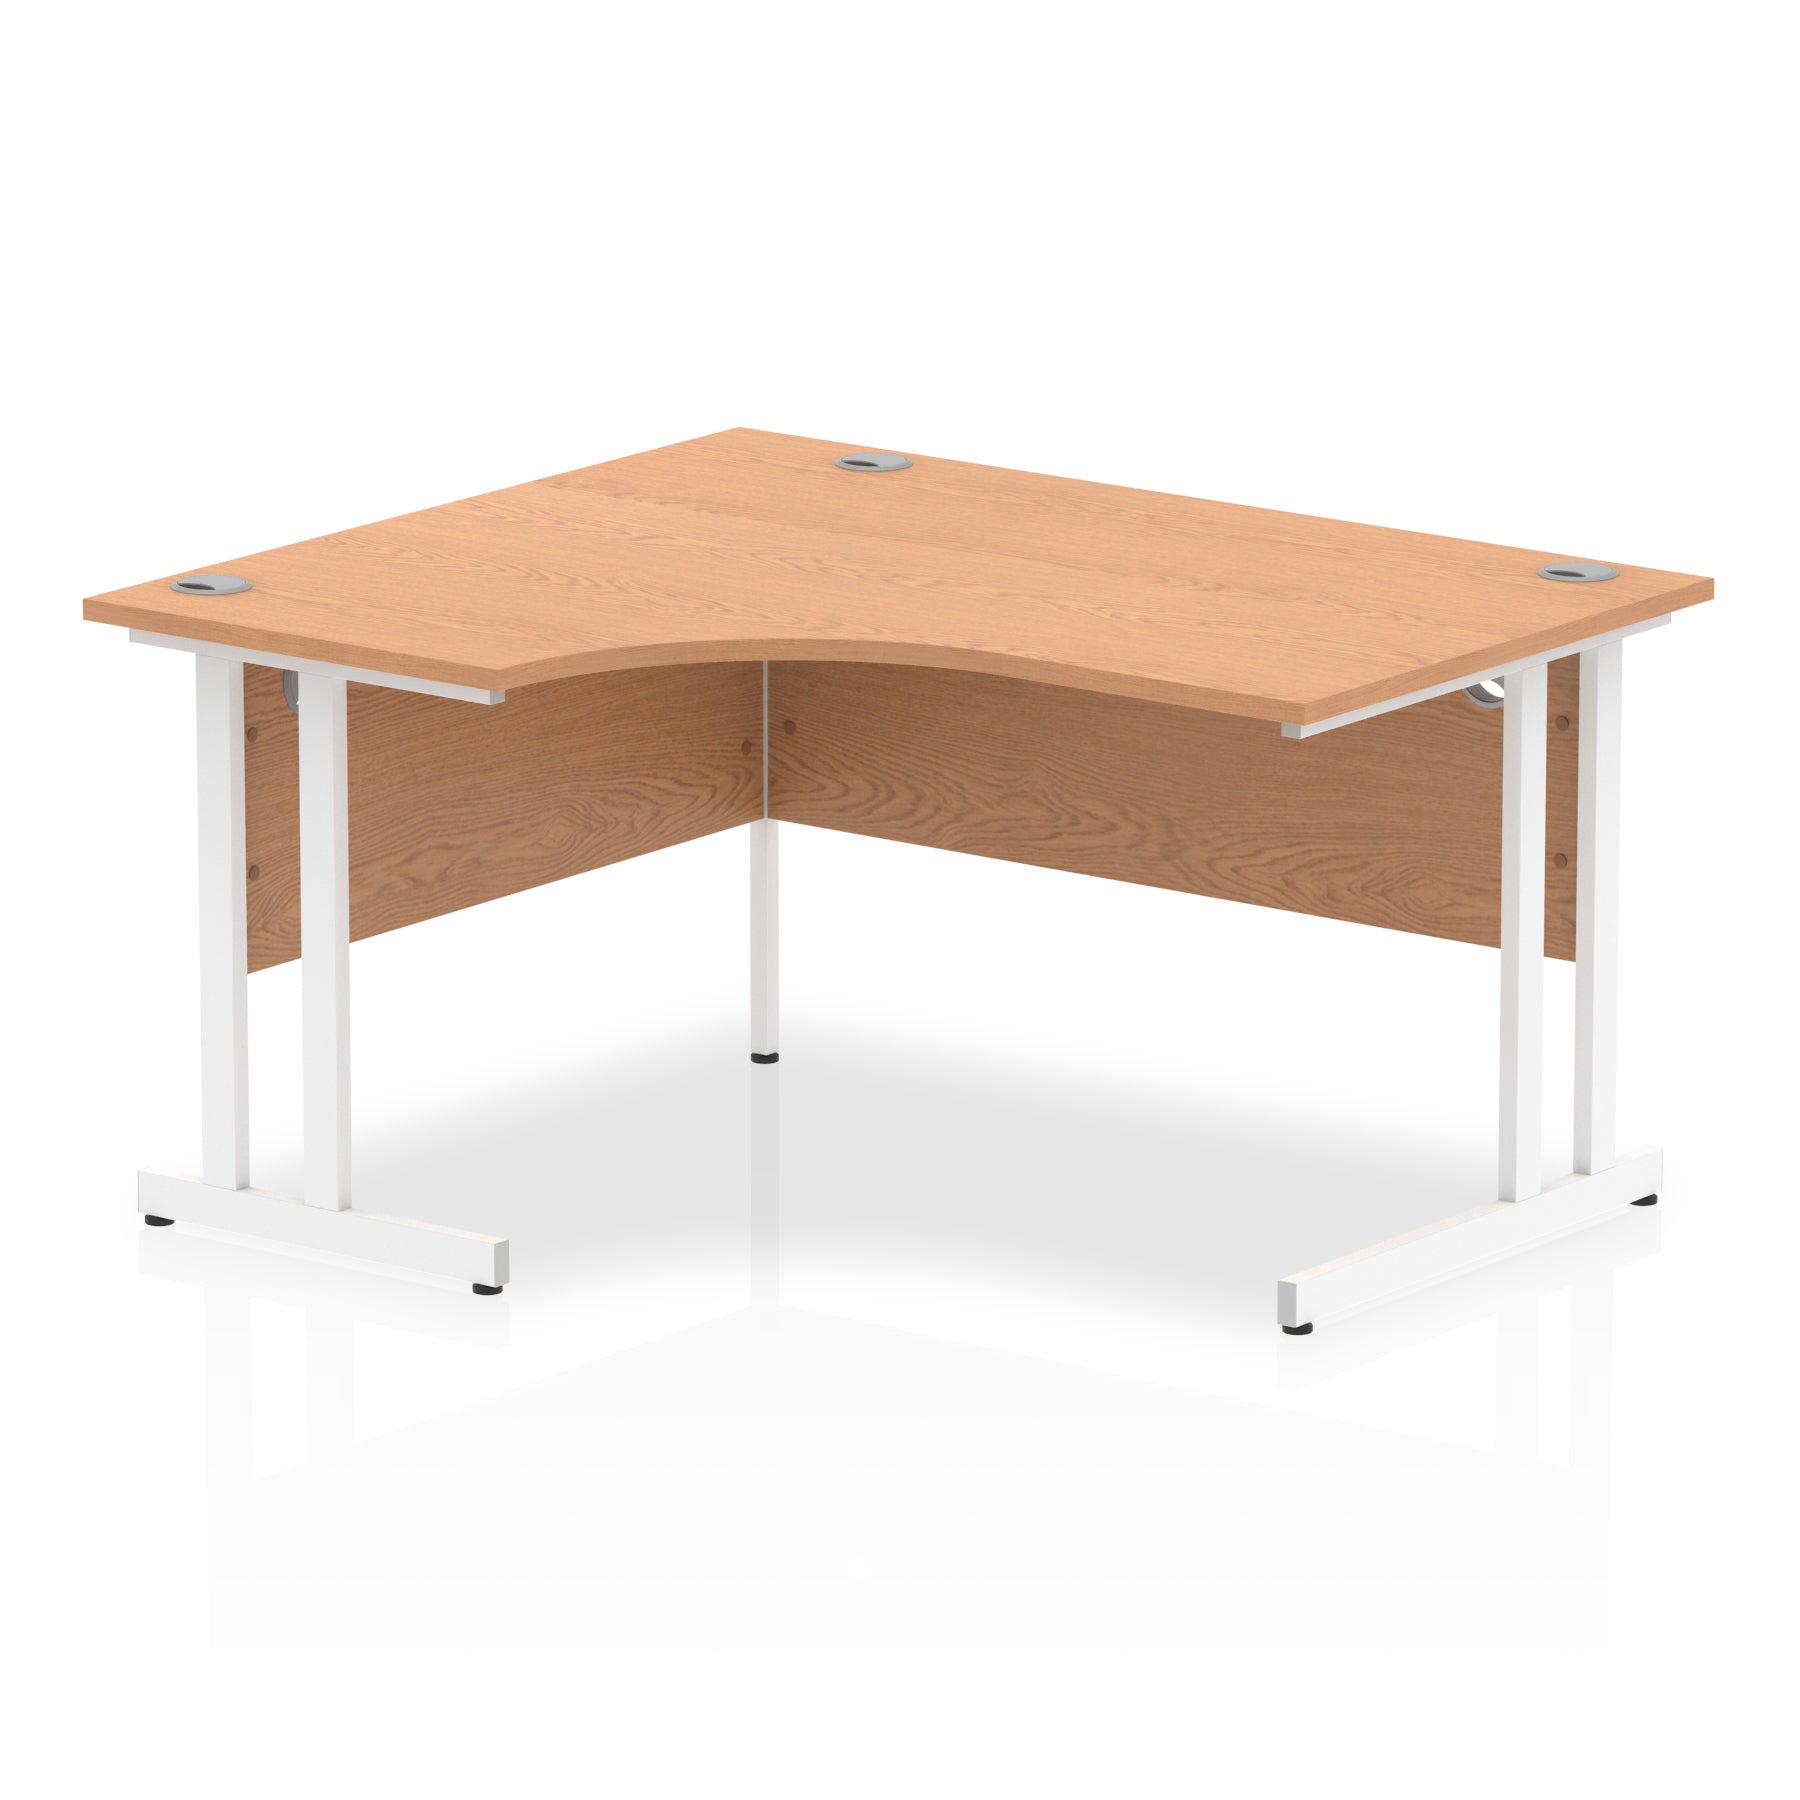 Impulse 1400mm Left Crescent Desk Cantilever Leg - MFC Material, 1400x1200 Top, Silver/White/Black Frame, 5-Year Guarantee, Self-Assembly